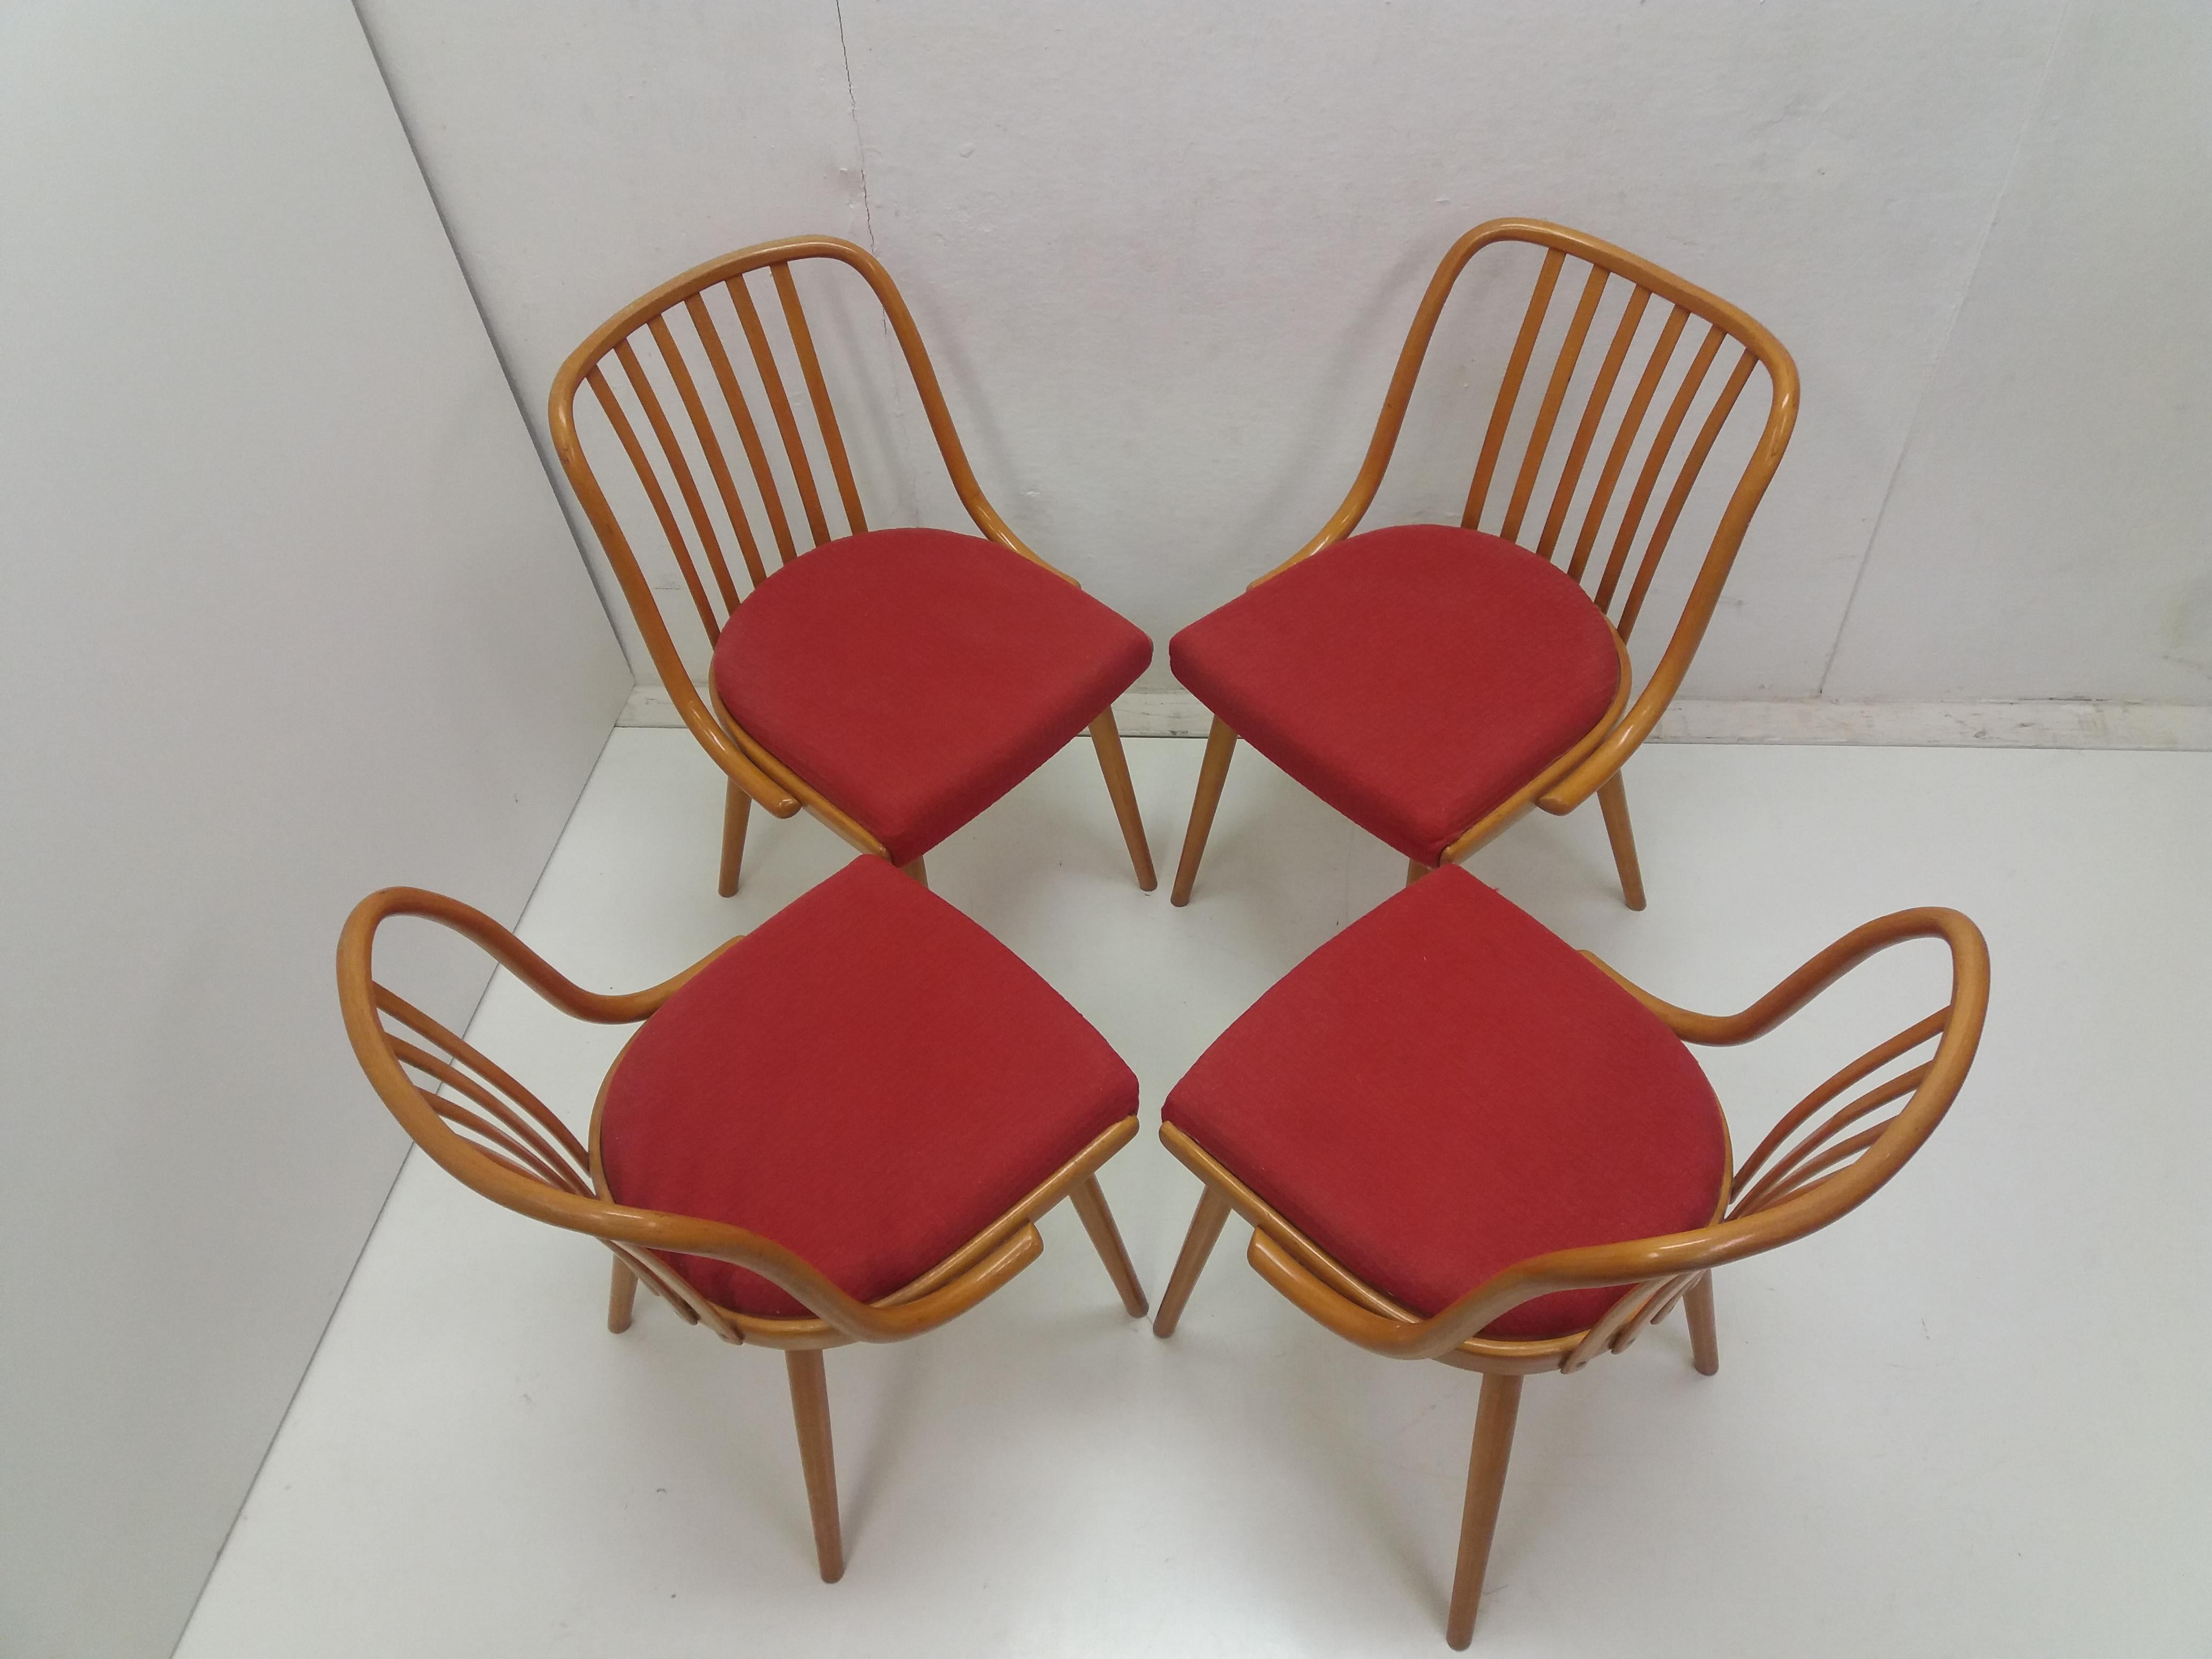 1960 Set of 4 Retro Suman Chairs and Table, Czechoslovakia For Sale 1